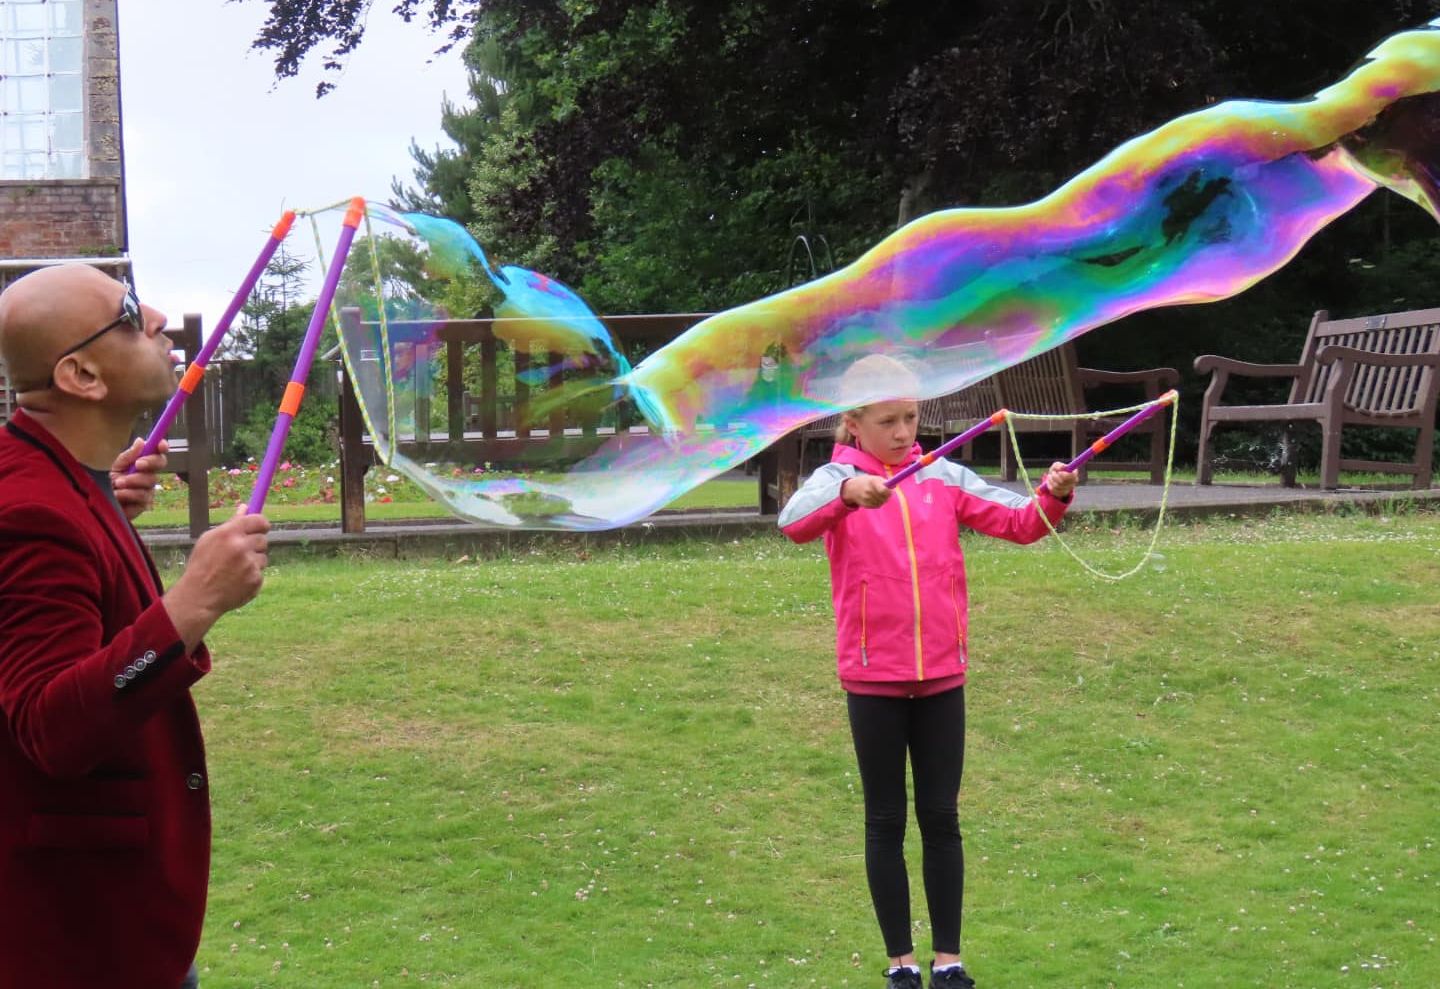 Thousands of people enjoyed a Family Fun Day at the Botanic Gardens in Churchtown in Southport. The Paris Bubbles Entertainment soap bubble artist was among the attractions. Photo by Andrew Brown Media